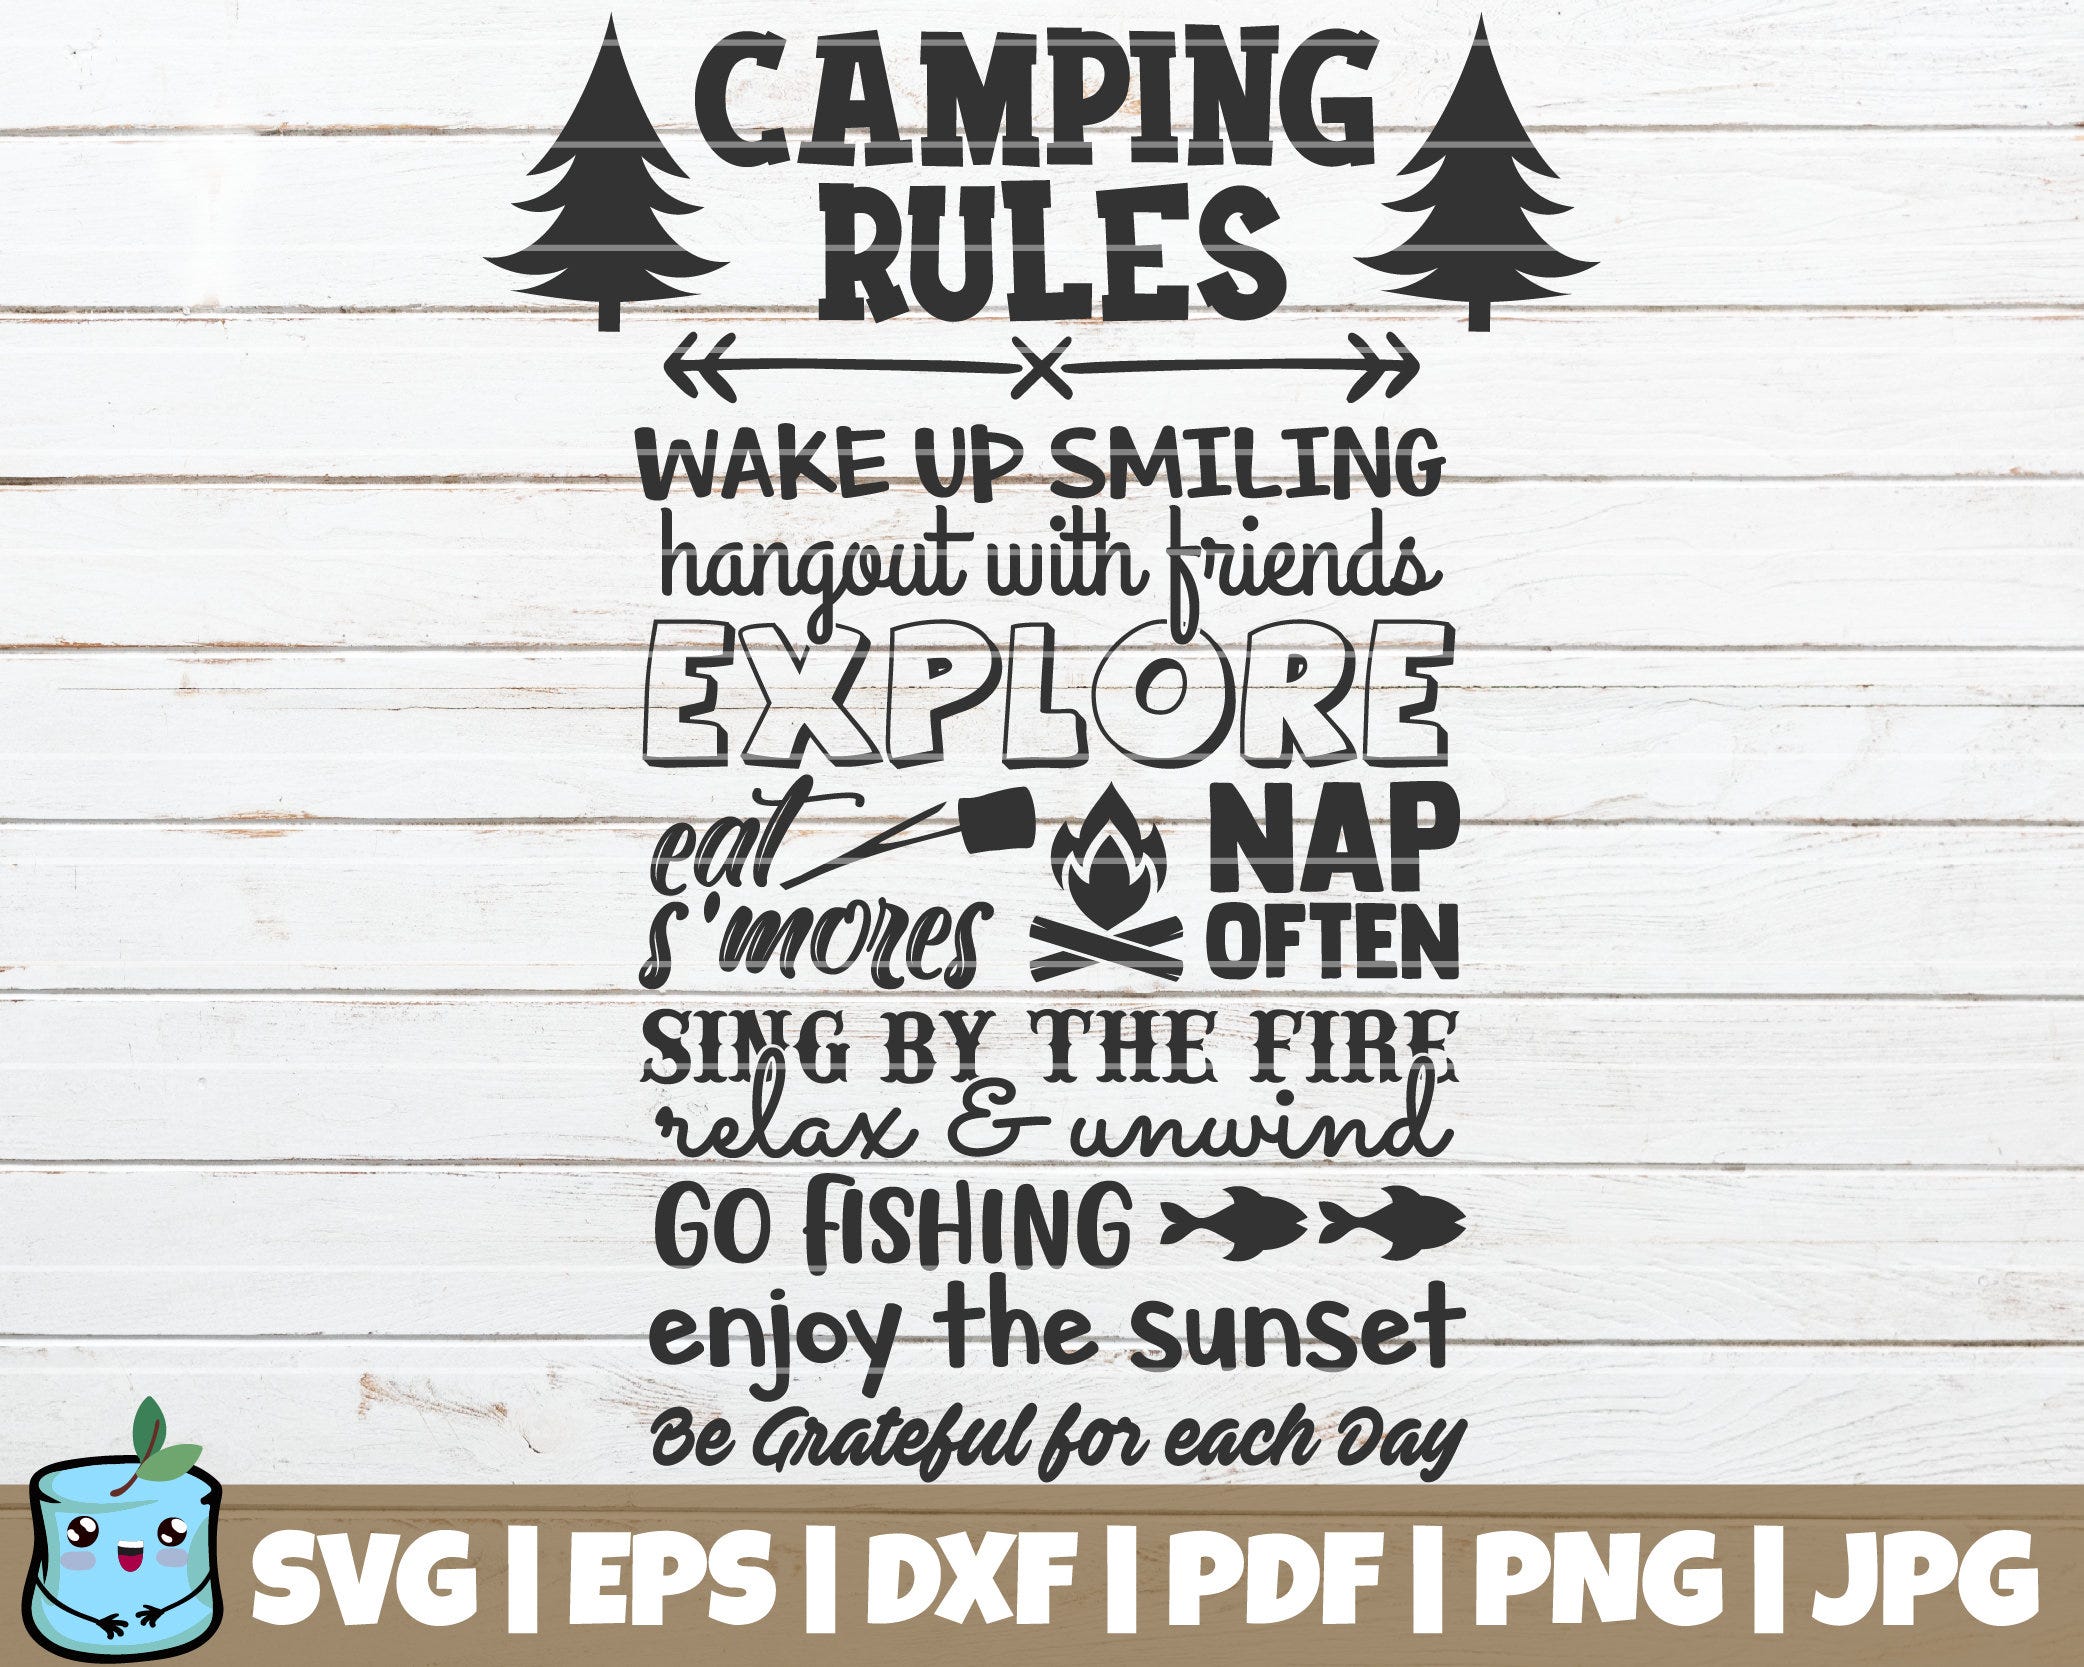 Camping Rules SVG Cut File | commercial use | instant download | printable vector clip art | Camping Cut file | Saying Quote | Rules SVG